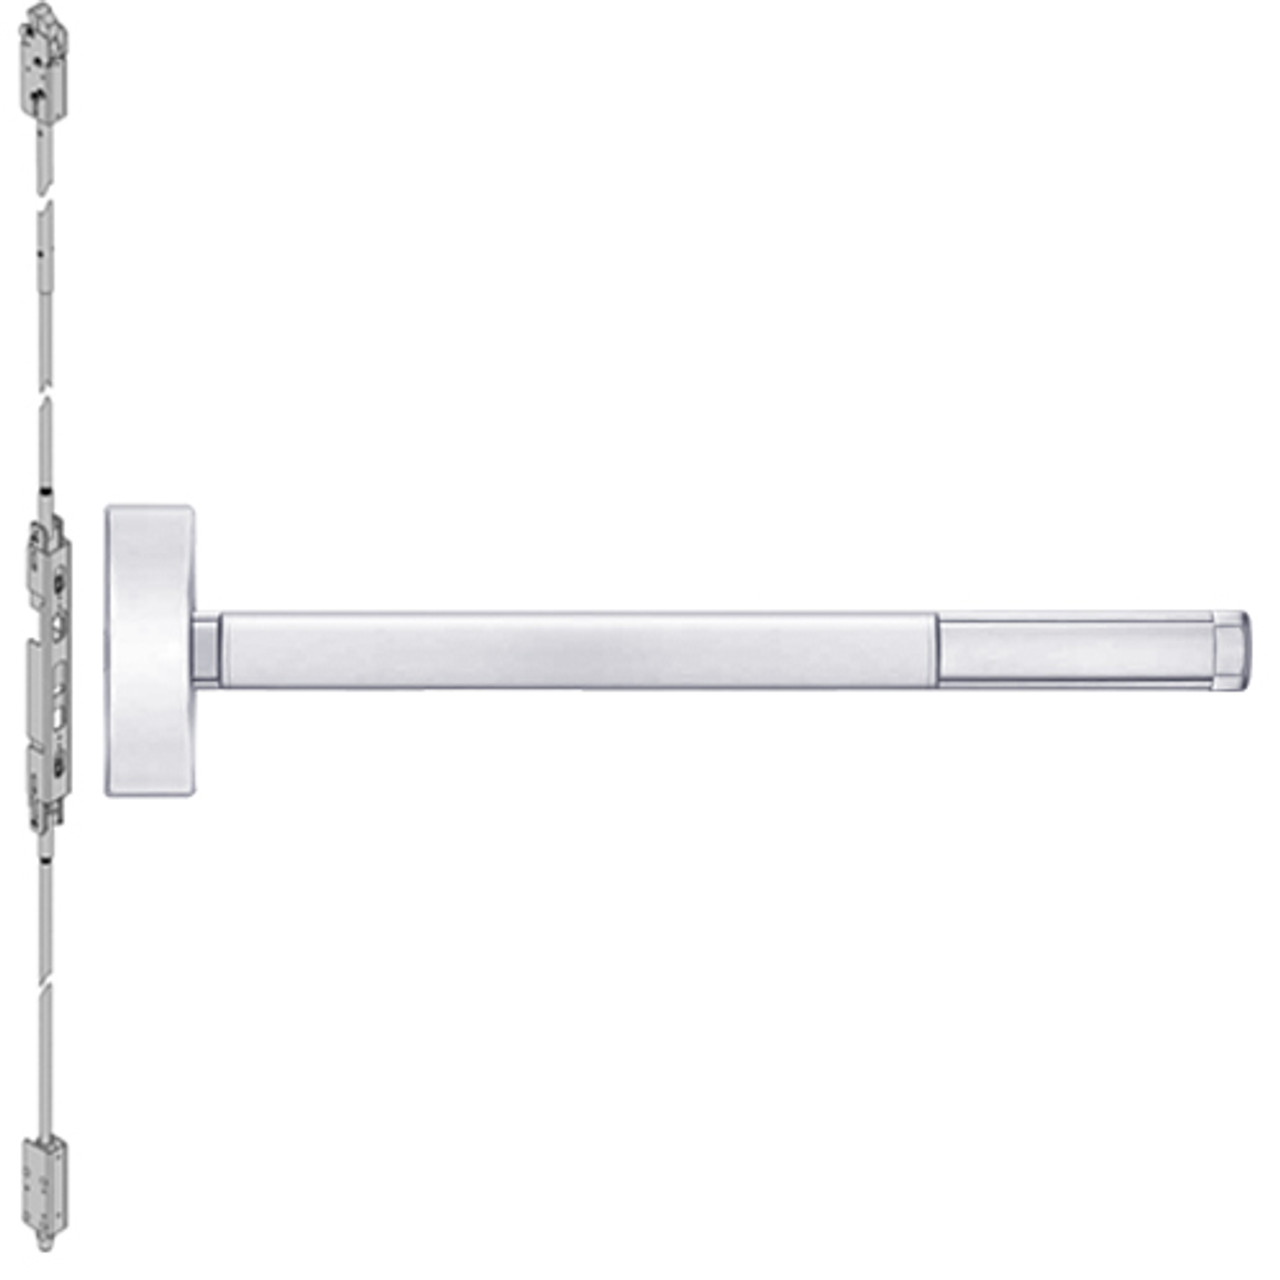 ELRFL2815LBR-625-48 PHI 2800 Series Fire Rated Concealed Vertical Rod Exit Device with Electric Latch Retraction Prepped for Thumbpiece Always Active in Bright Chrome Finish